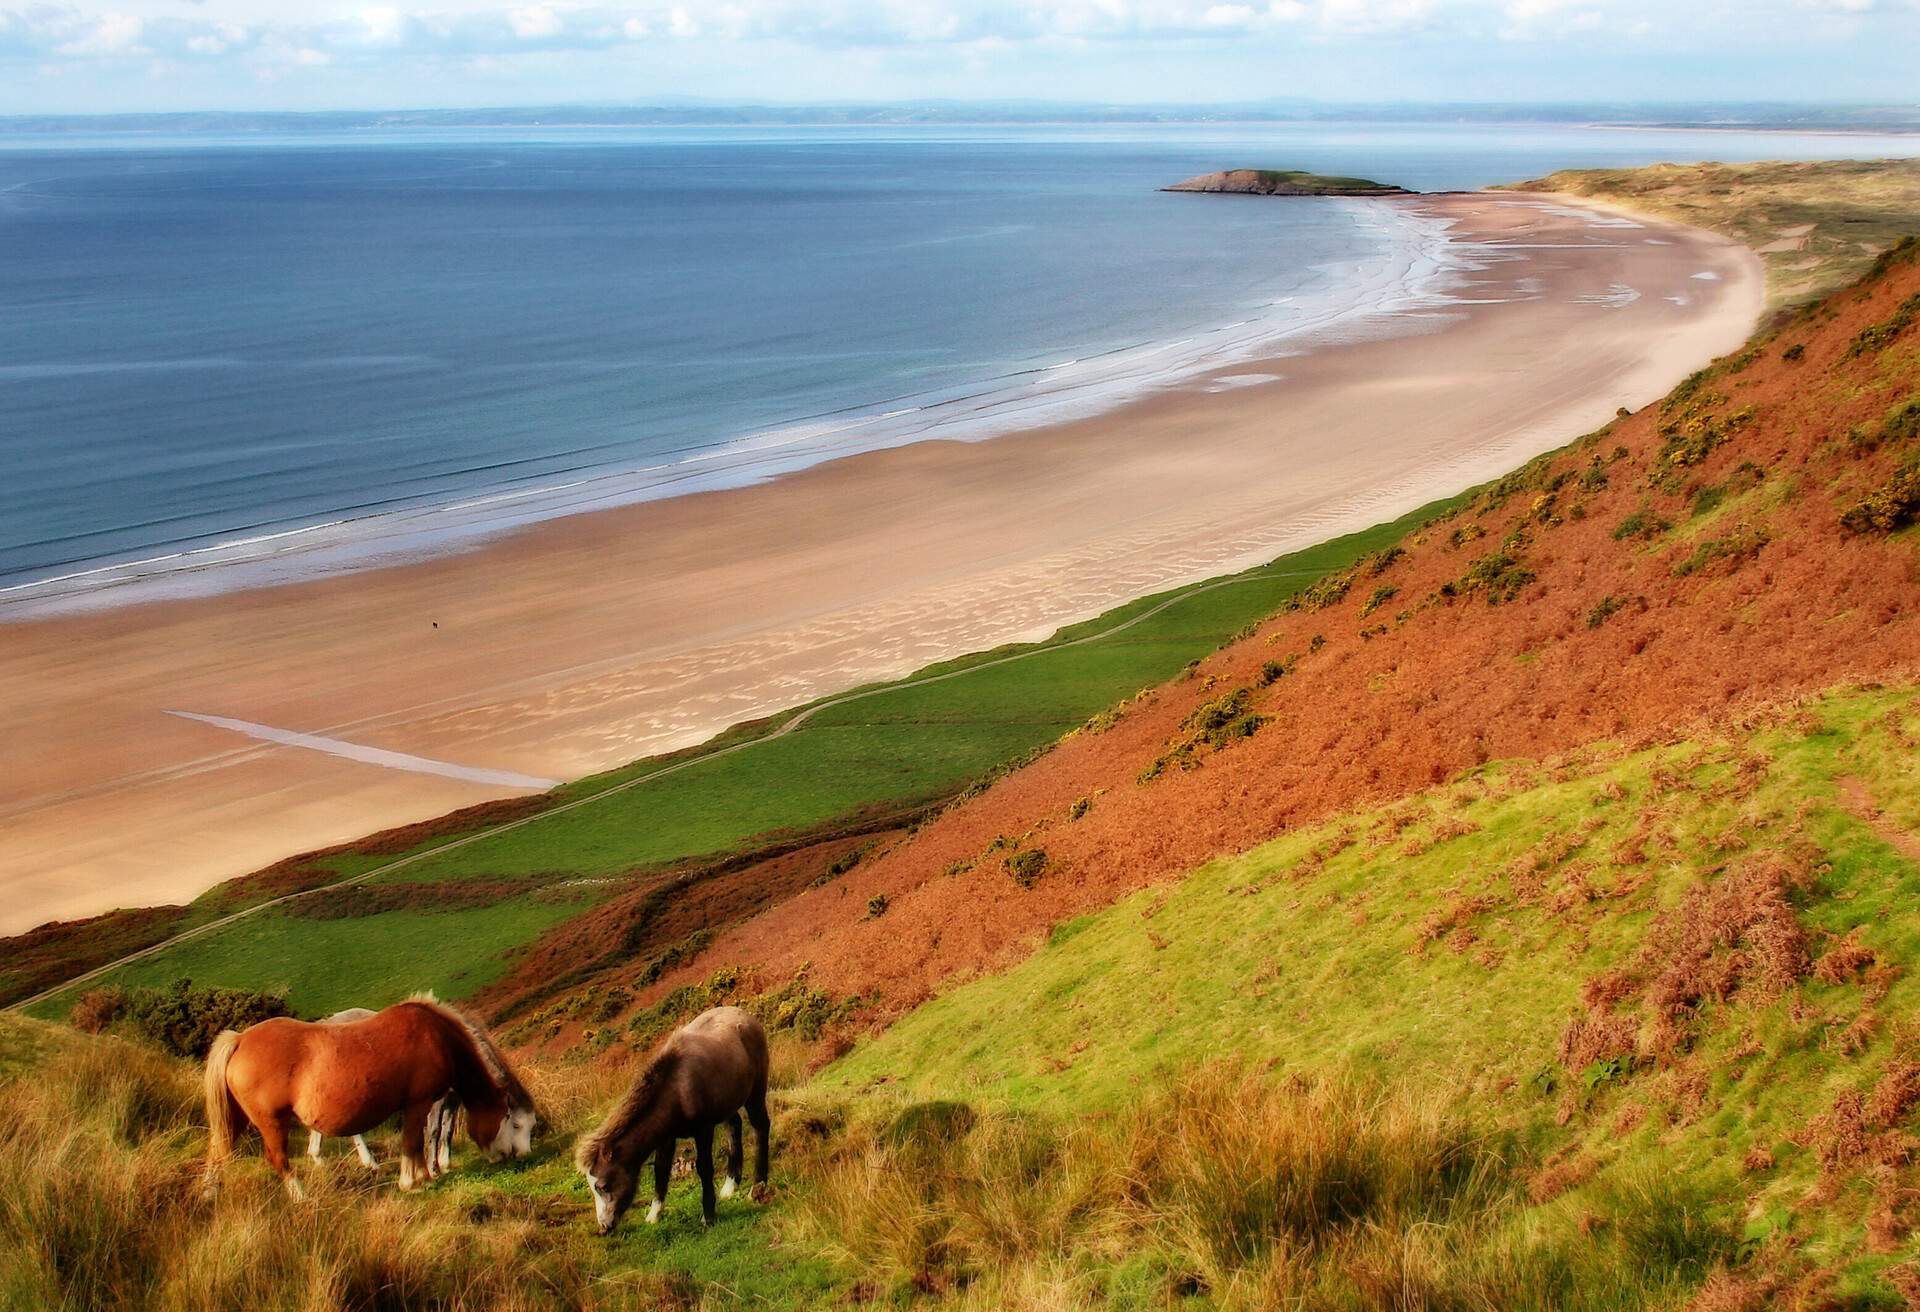 DEST_WALES_GOWER_Rhossili Bay_GettyImages-93453546